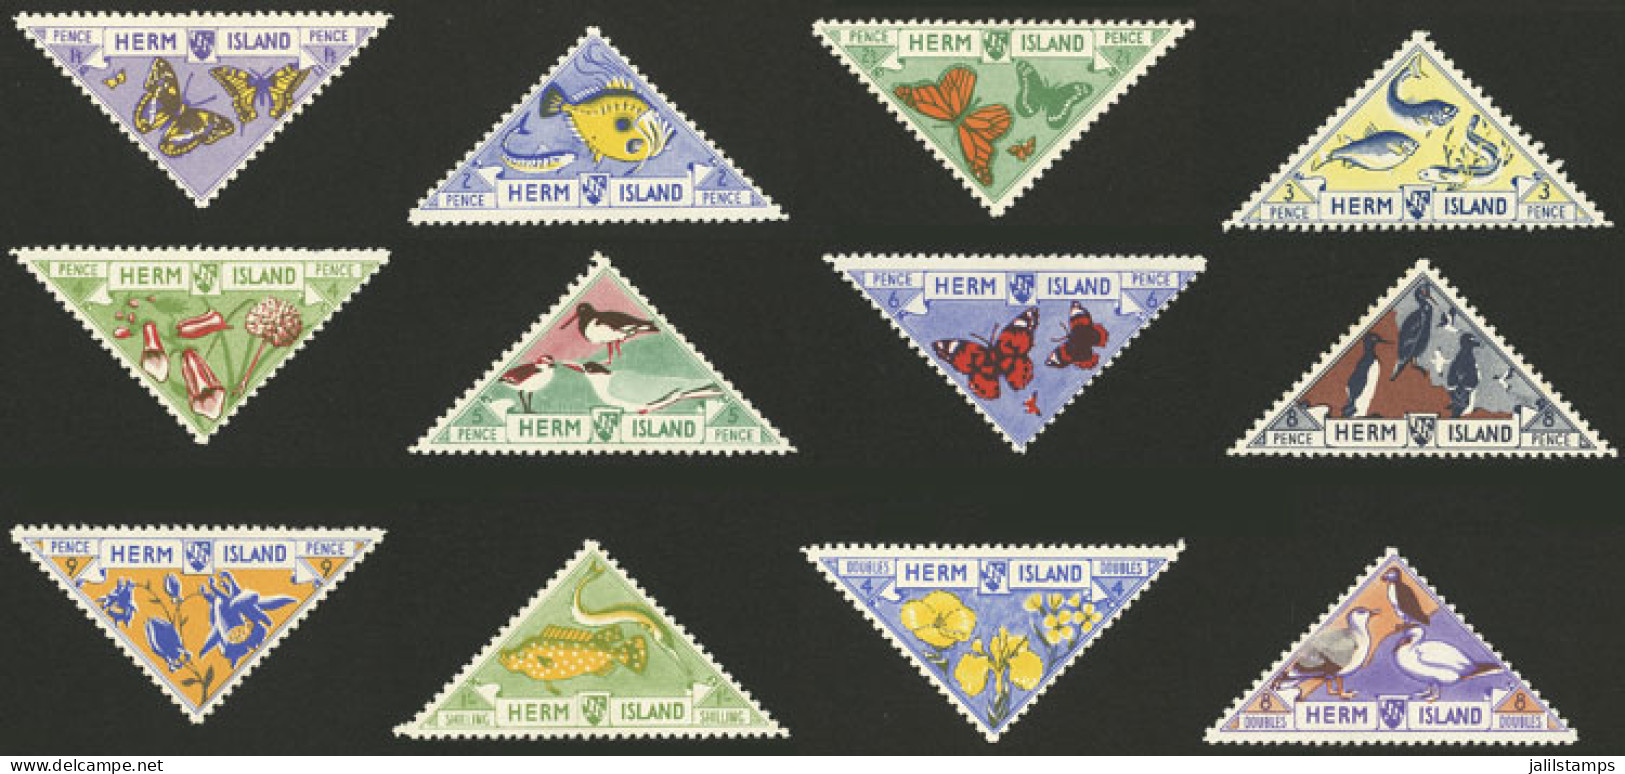 GREAT BRITAIN: HERM ISLAND: Fauna, Set Of 12 Triangular Values, Mint Without Gum, Fine Quality, Very Nice! - Erinnophilie